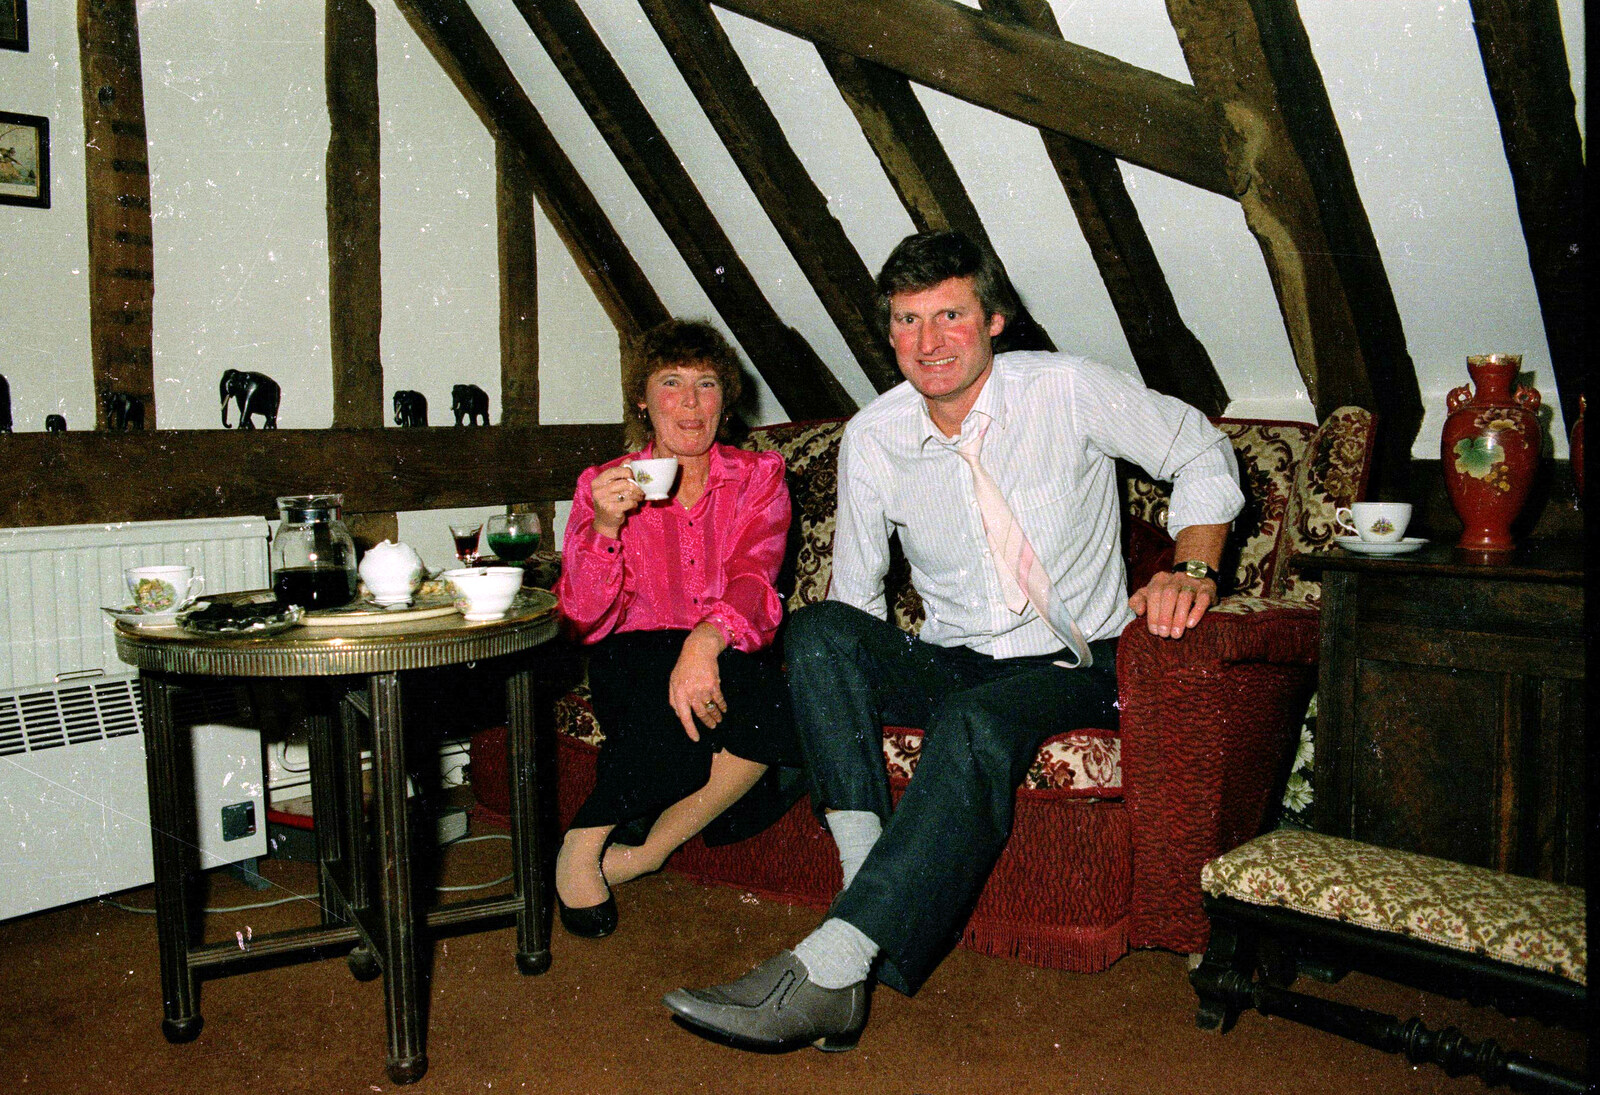 Brenda and Geoff from Pedros and Daffodils, Norwich and Billingford, Norfolk - 20th April 1991